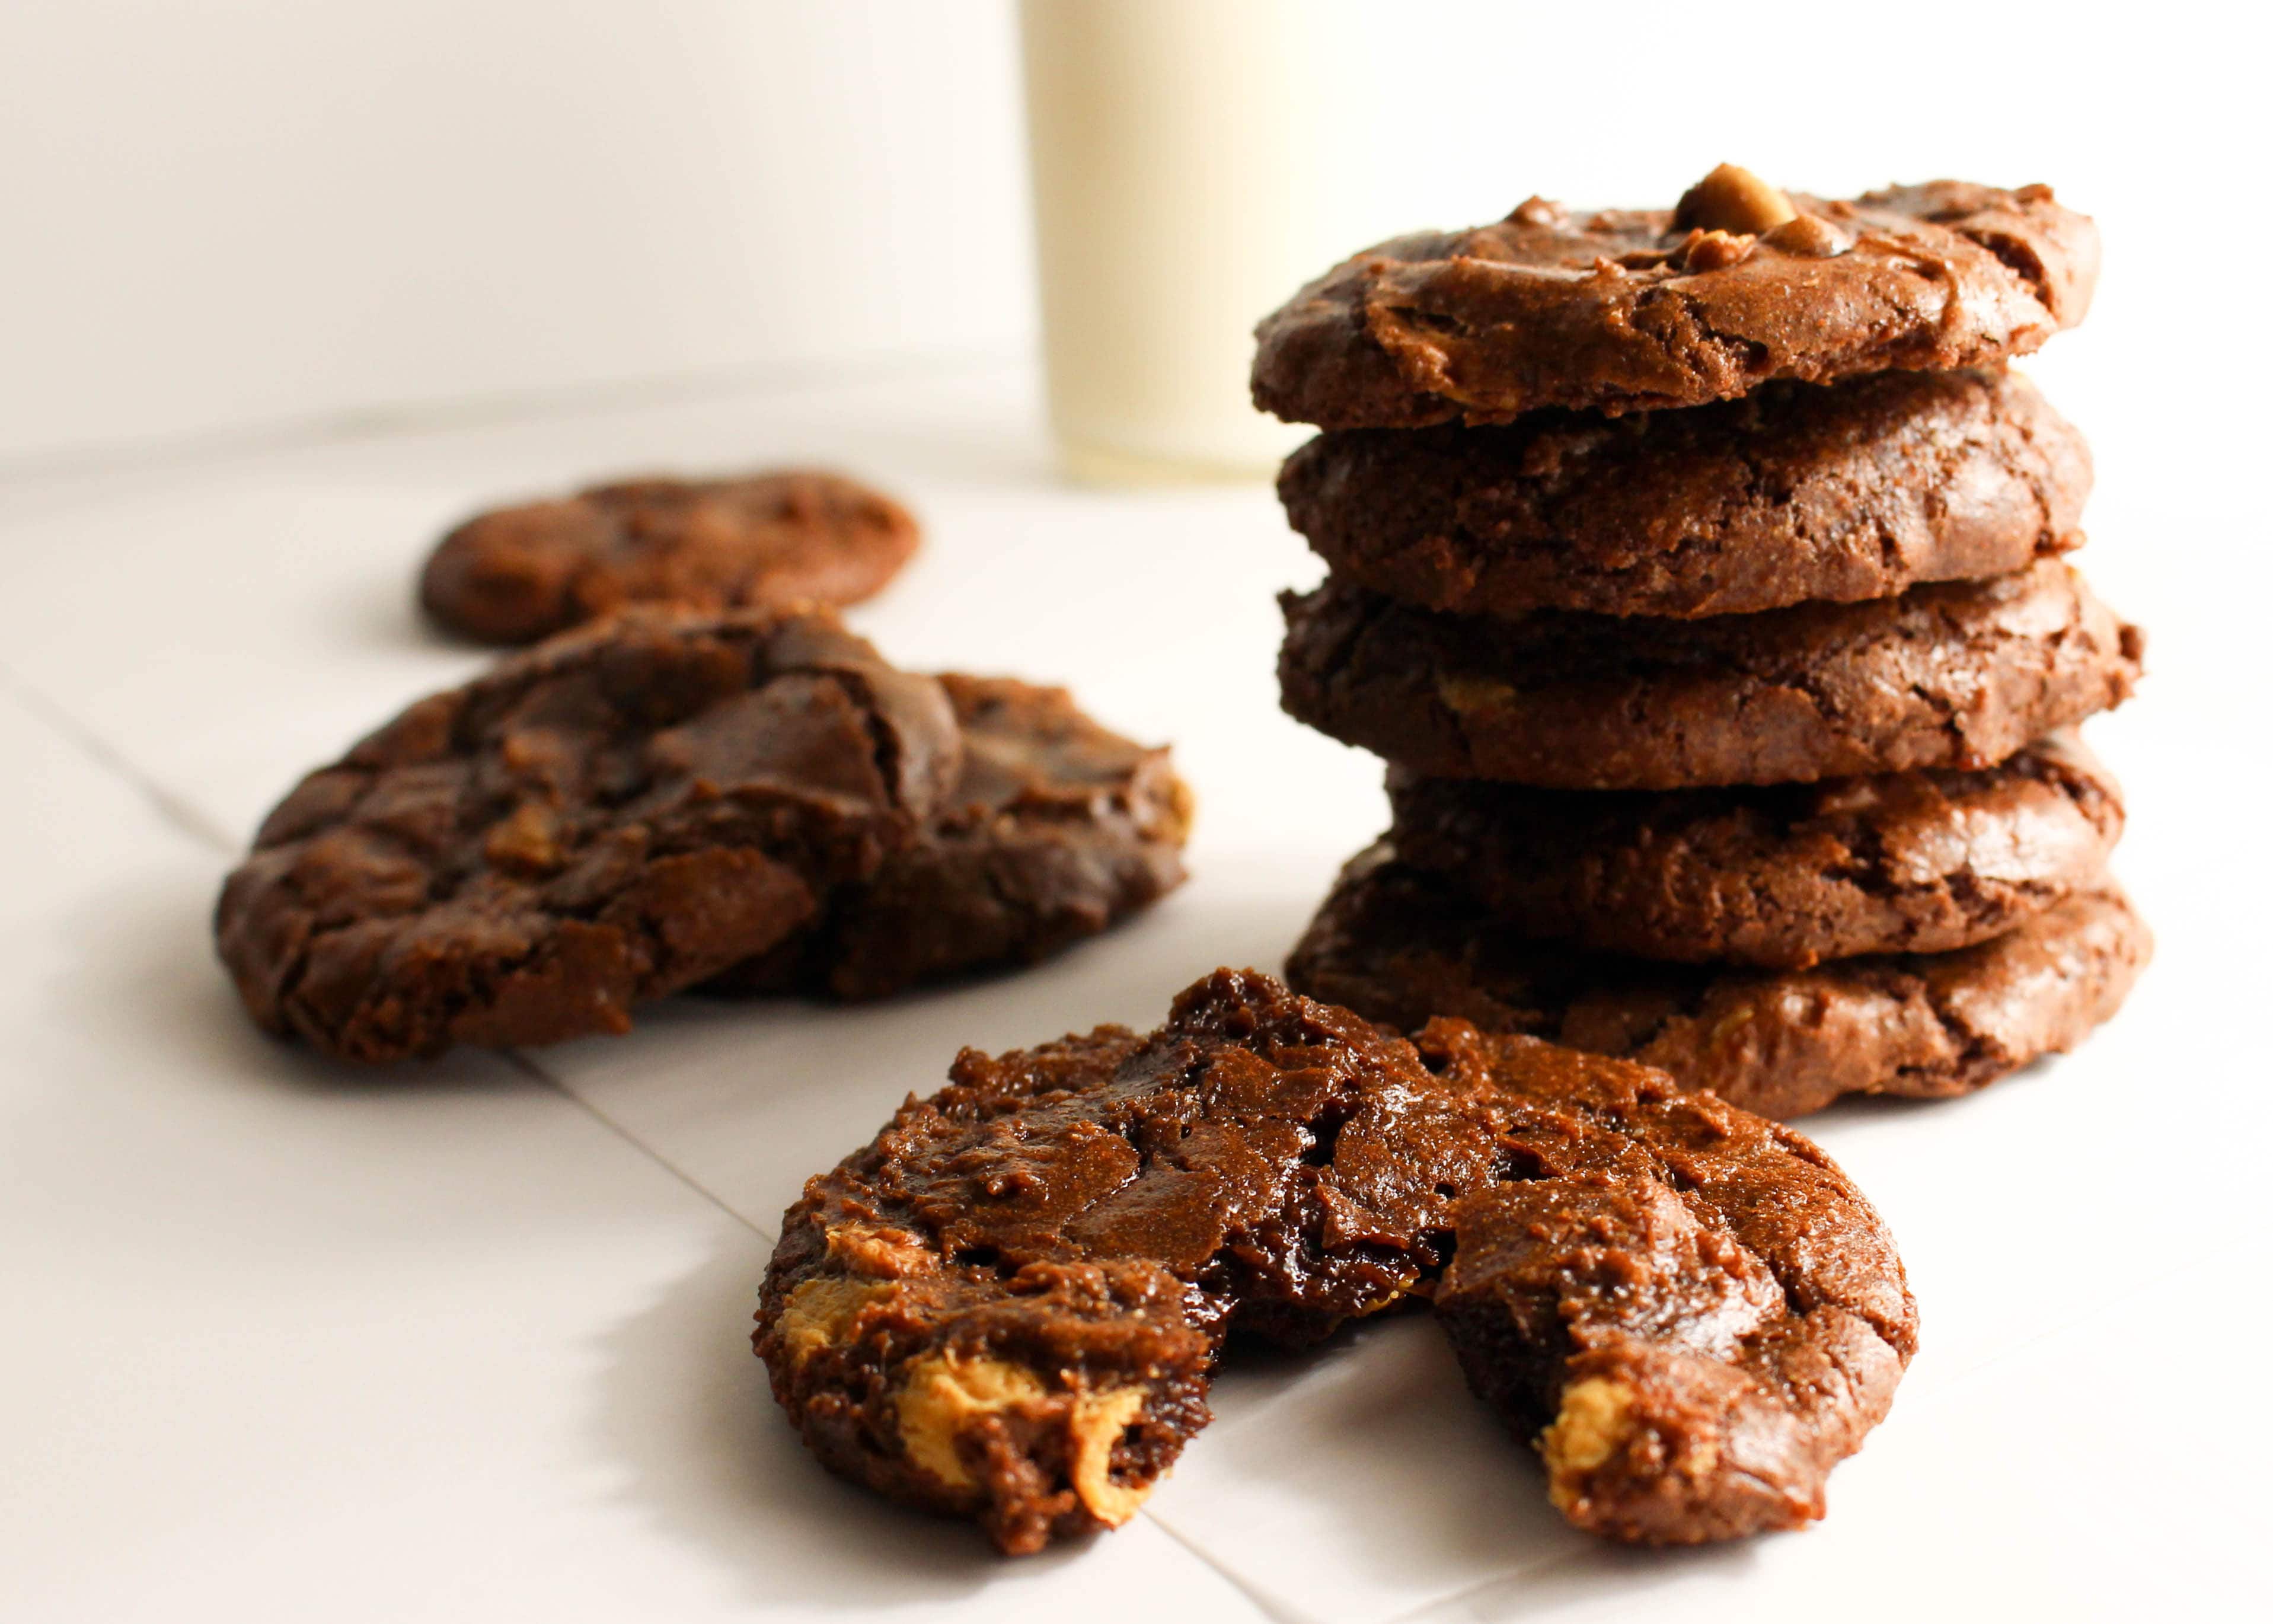 Raise your hand if you love brownies! Now you can satisfy that craving a little quicker with these gluten free brownie cookies-filled with all the rich, fudgey goodness you love about brownies, but in a nice portable package